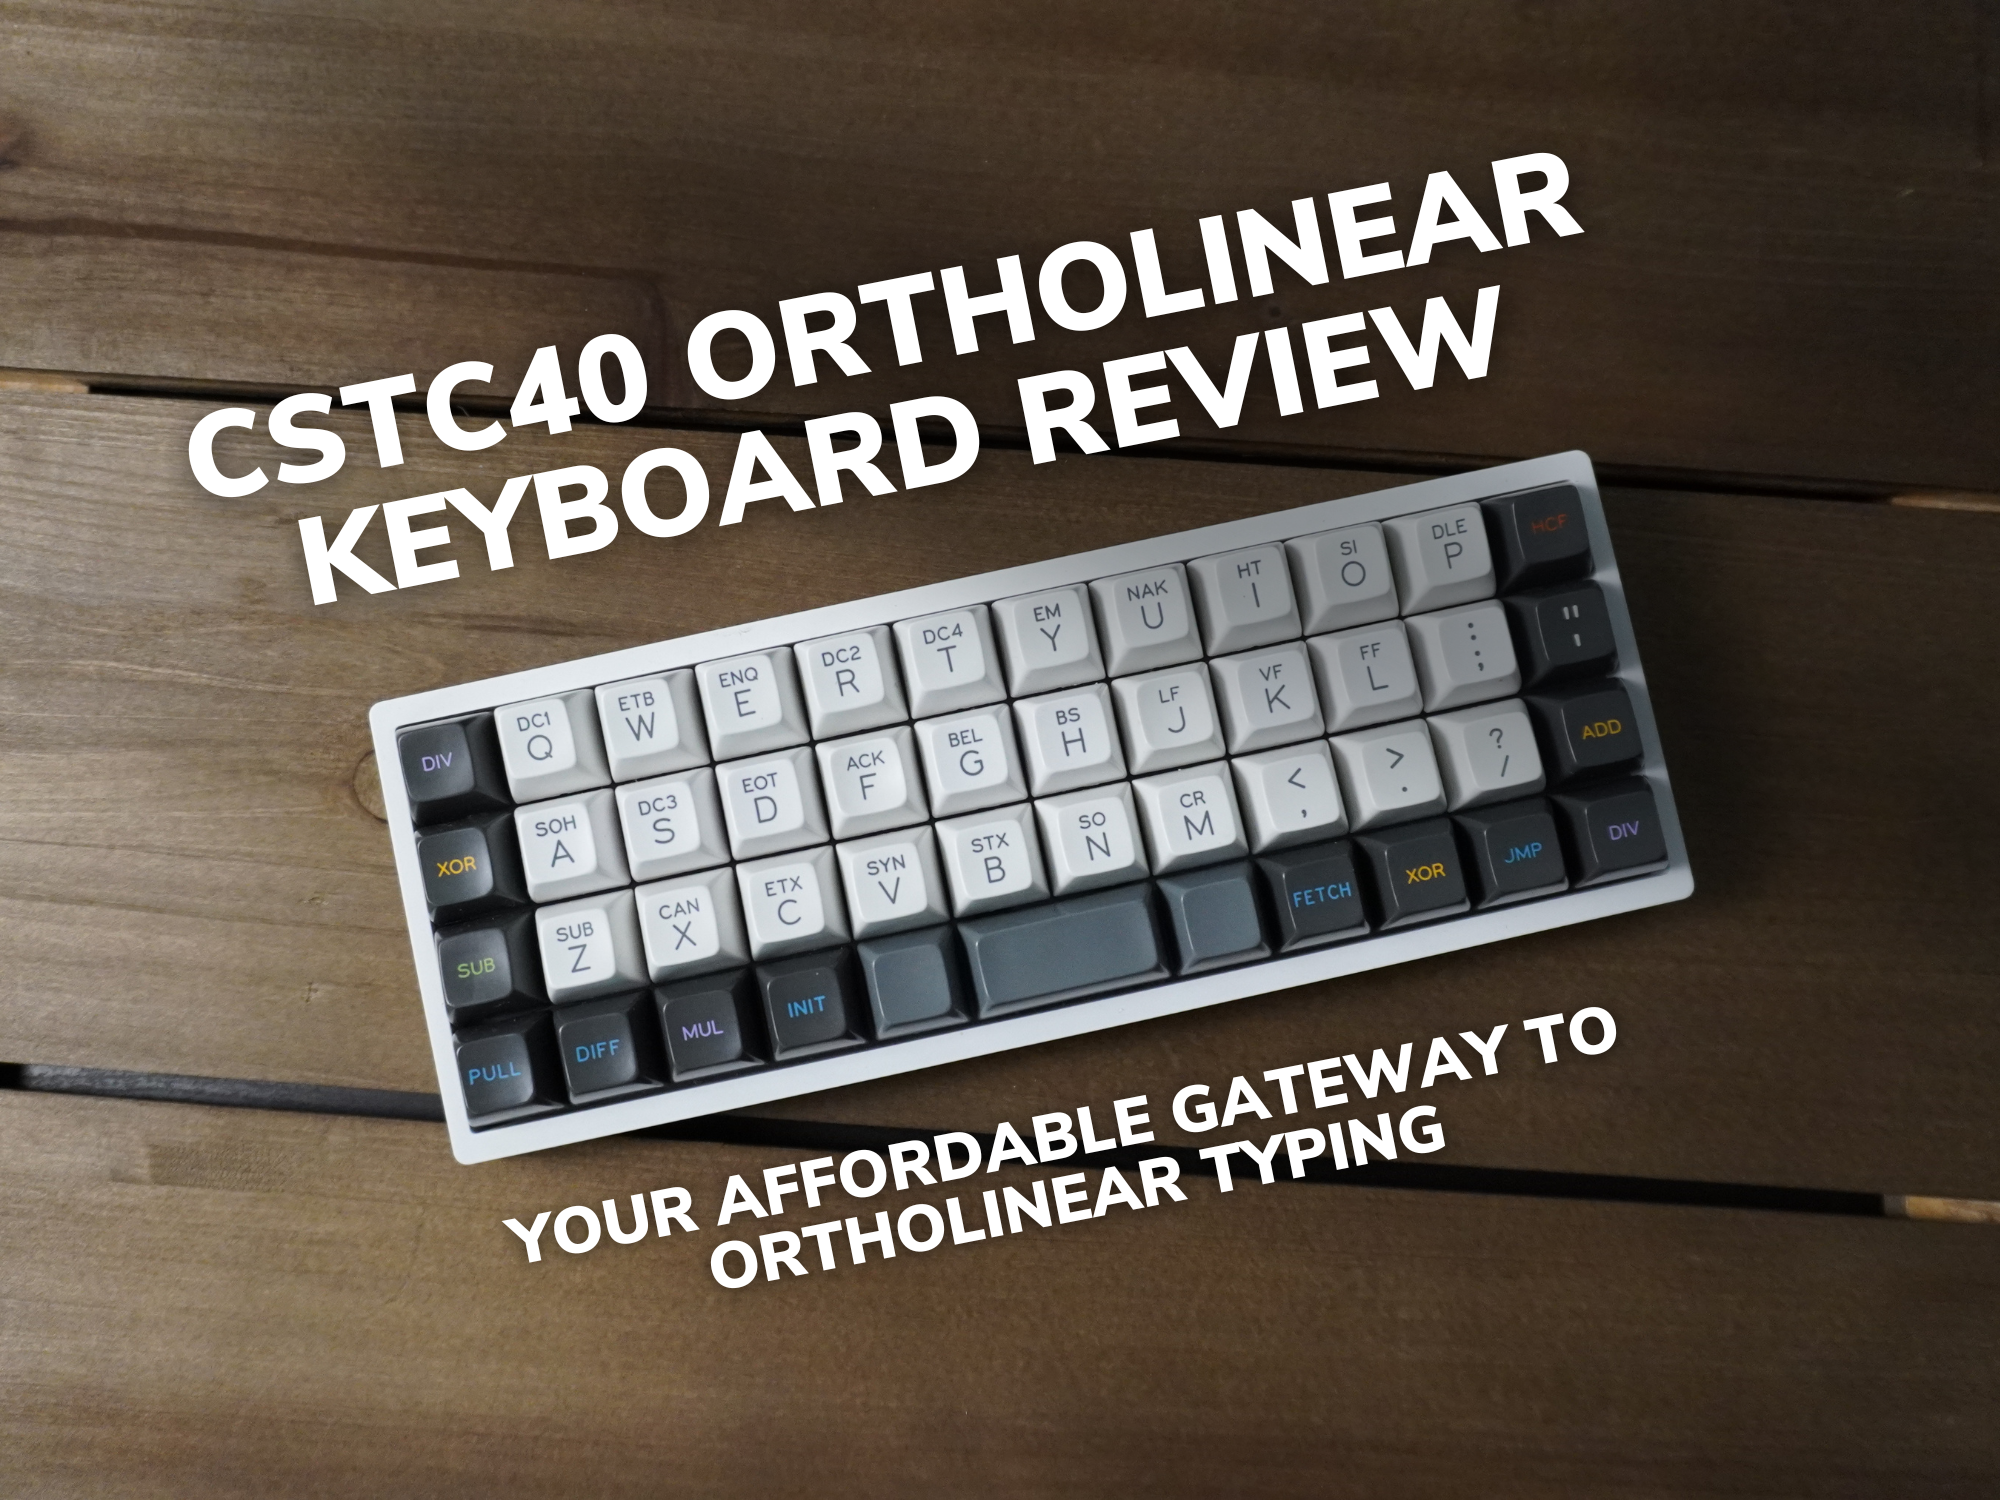 CSTC40 Ortholinear Keyboard Review: Your Affordable Gateway to Ortholinear Typing